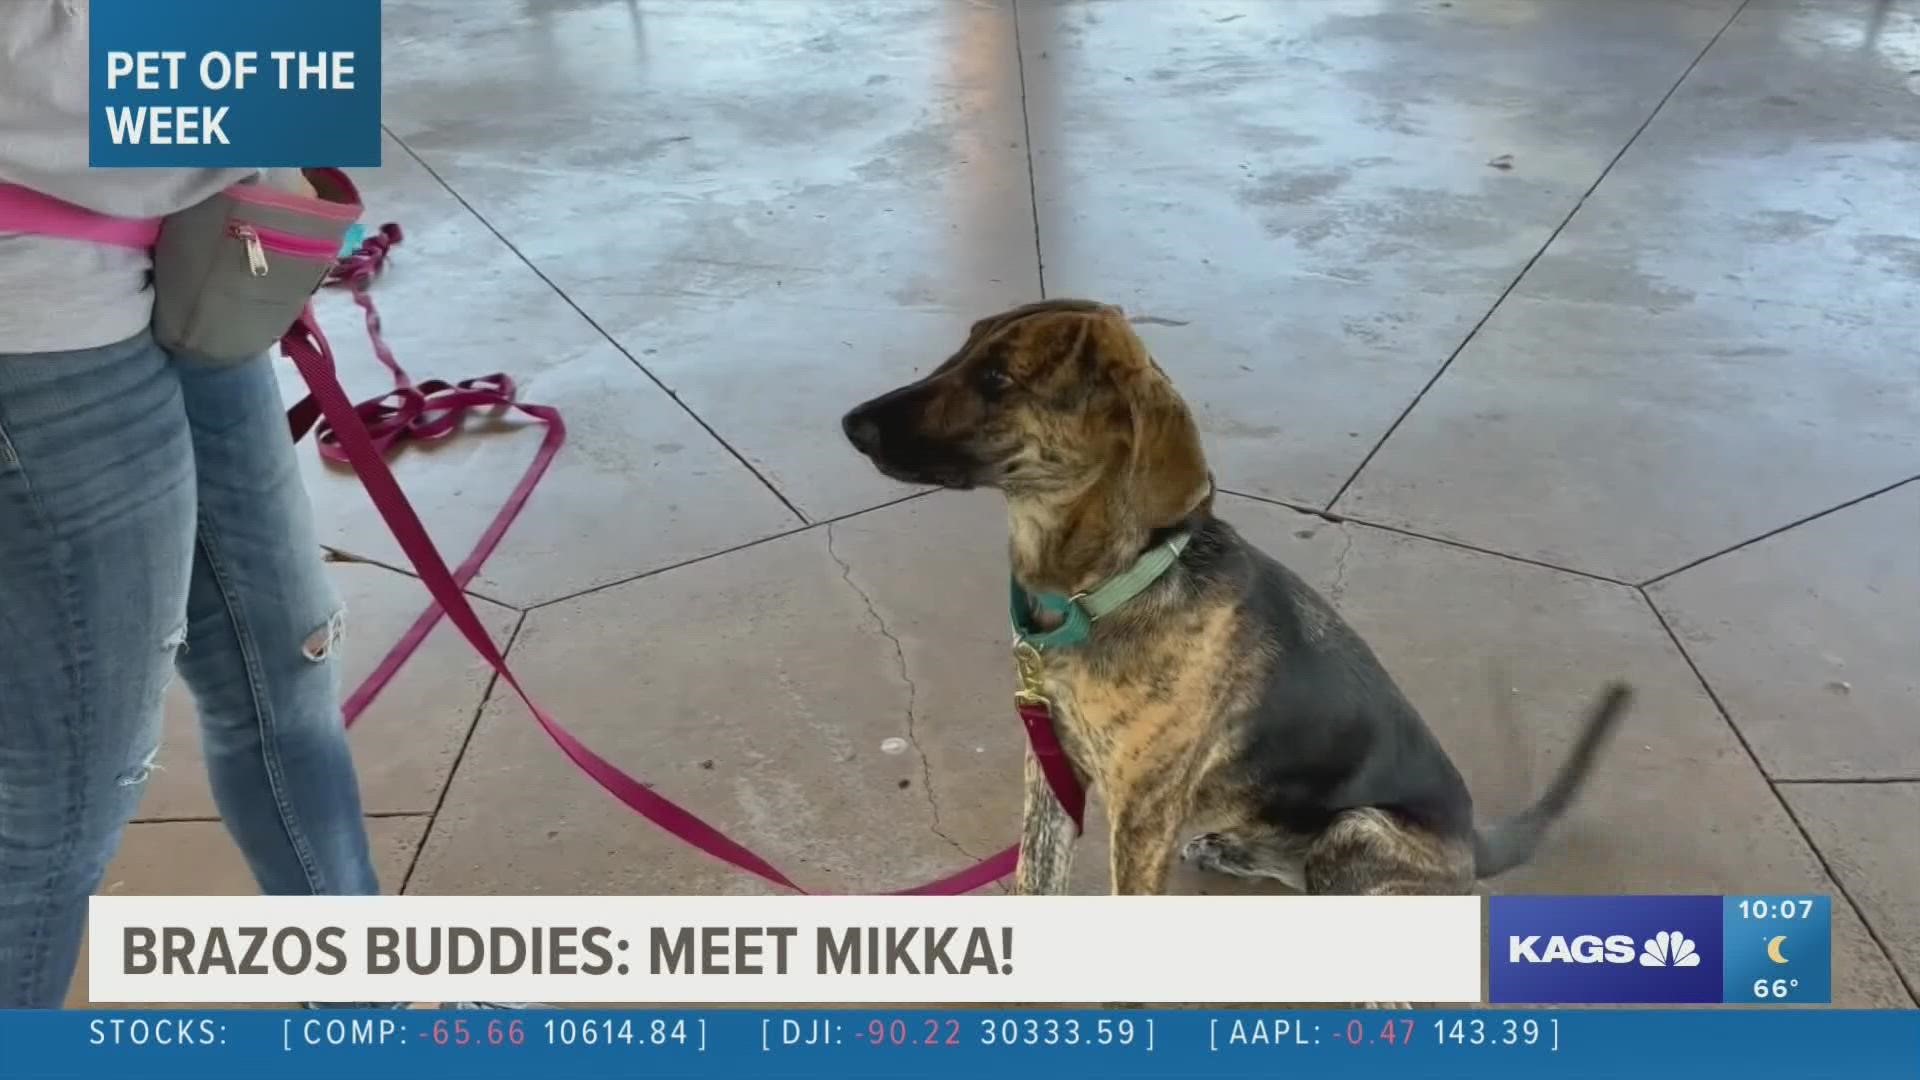 This week's featured Brazos Buddy is Mikka, an eight-month old Shepherd mix that's looking for her forever home.